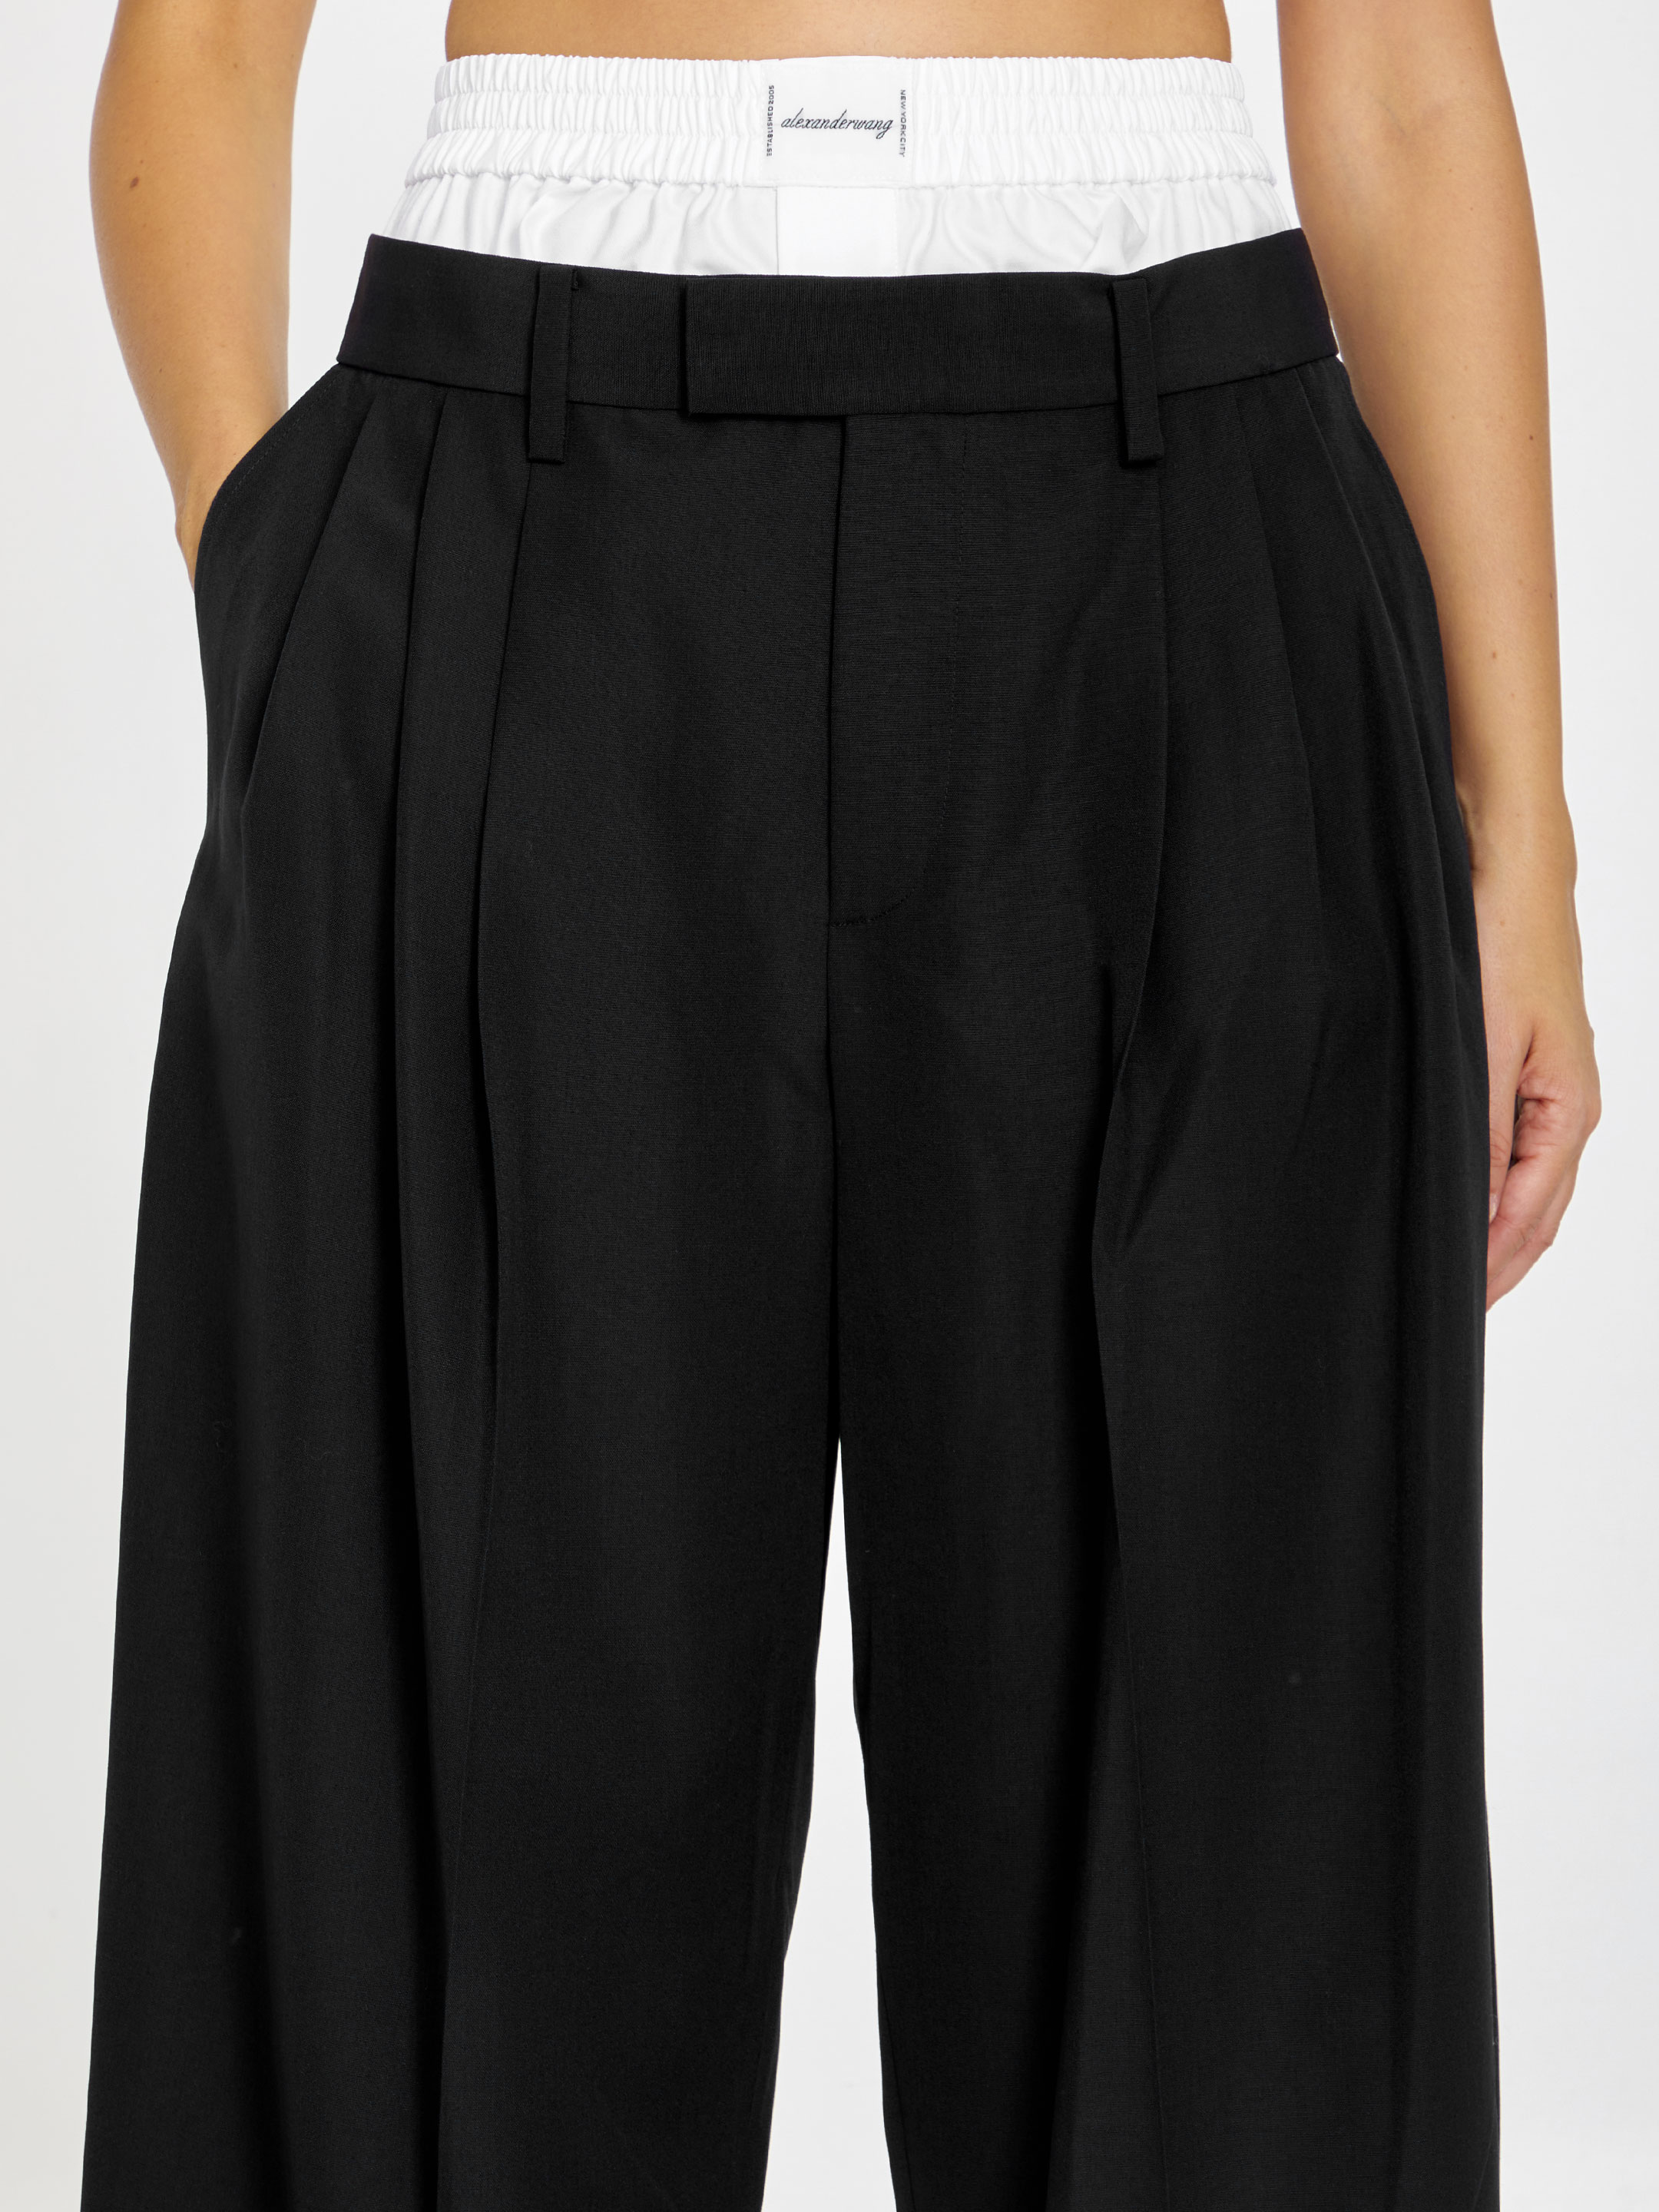 ALEXANDER WANG - Layered tailored trousers | Leam Roma - Luxury ...